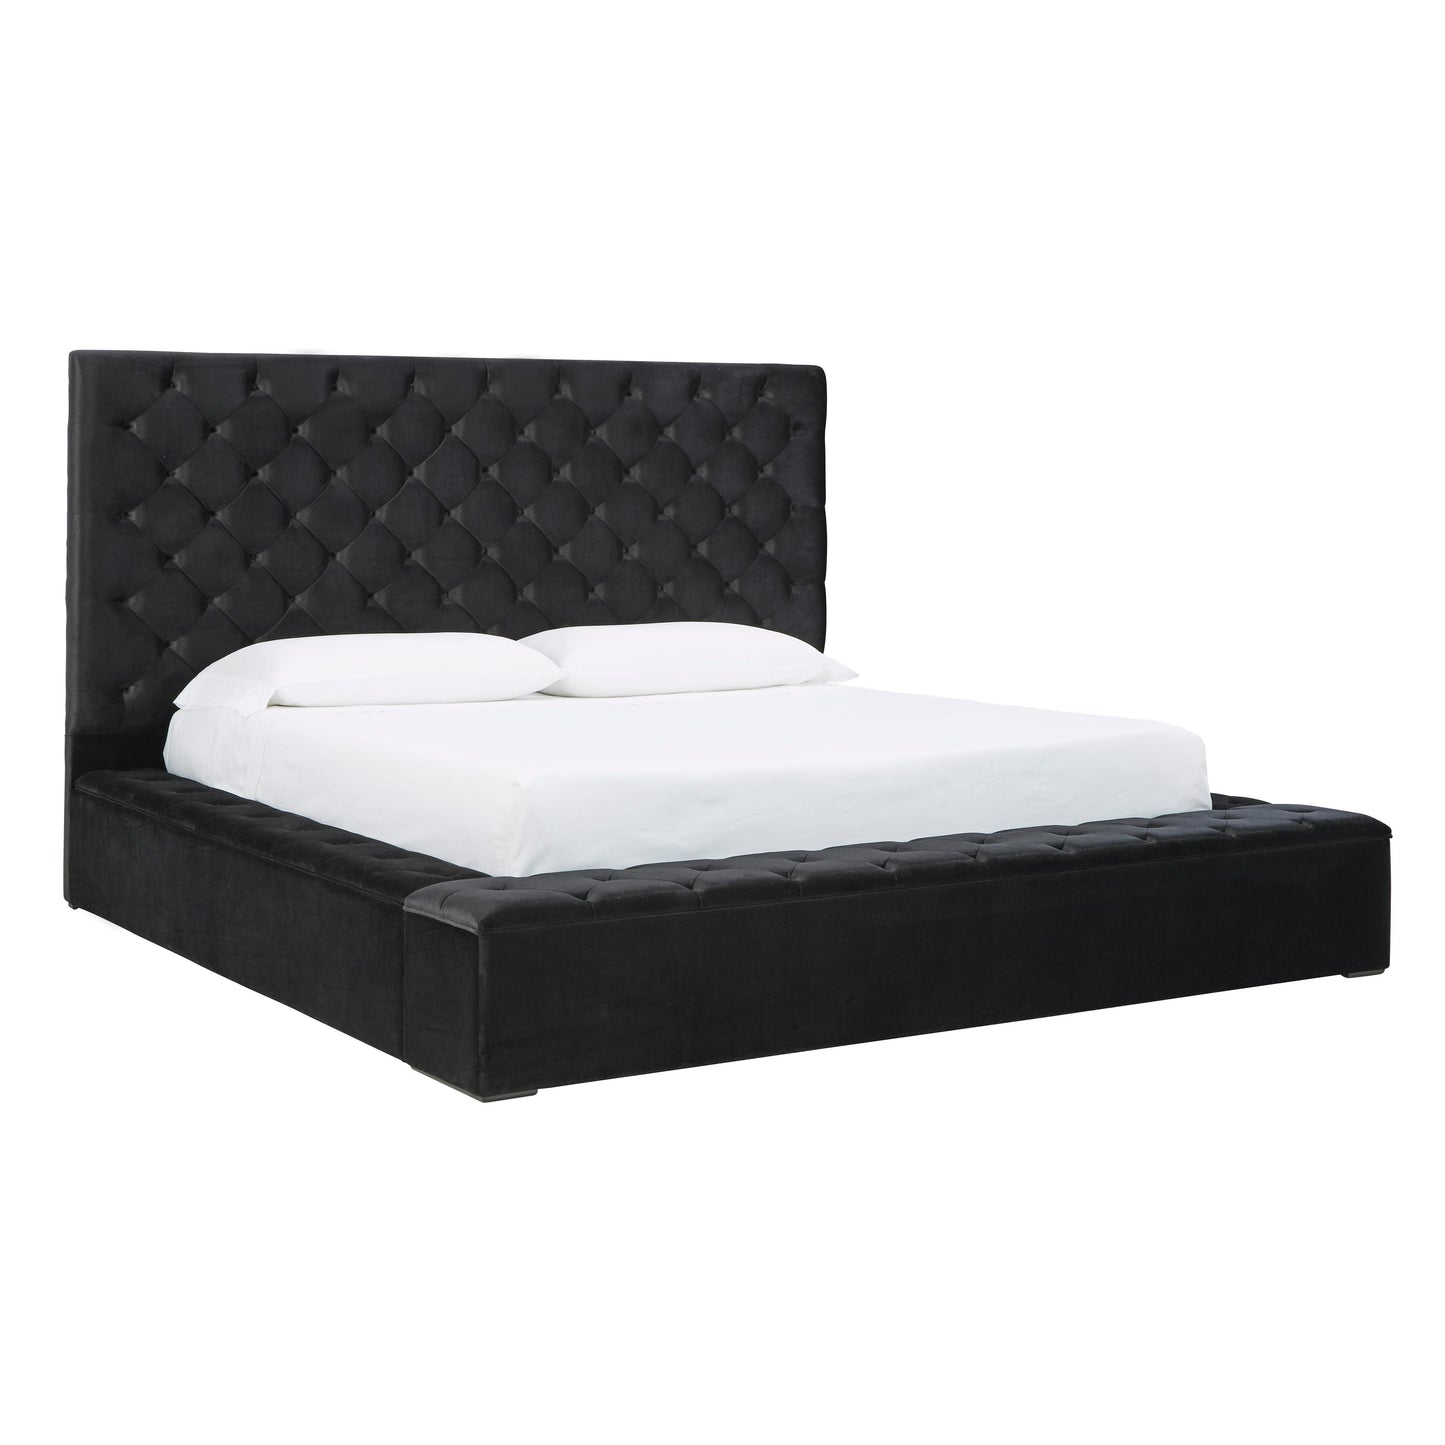 Signature Design by Ashley Lindenfield California King Upholstered Platform Bed with Storage B758-158/B758-156/B758-194 IMAGE 1